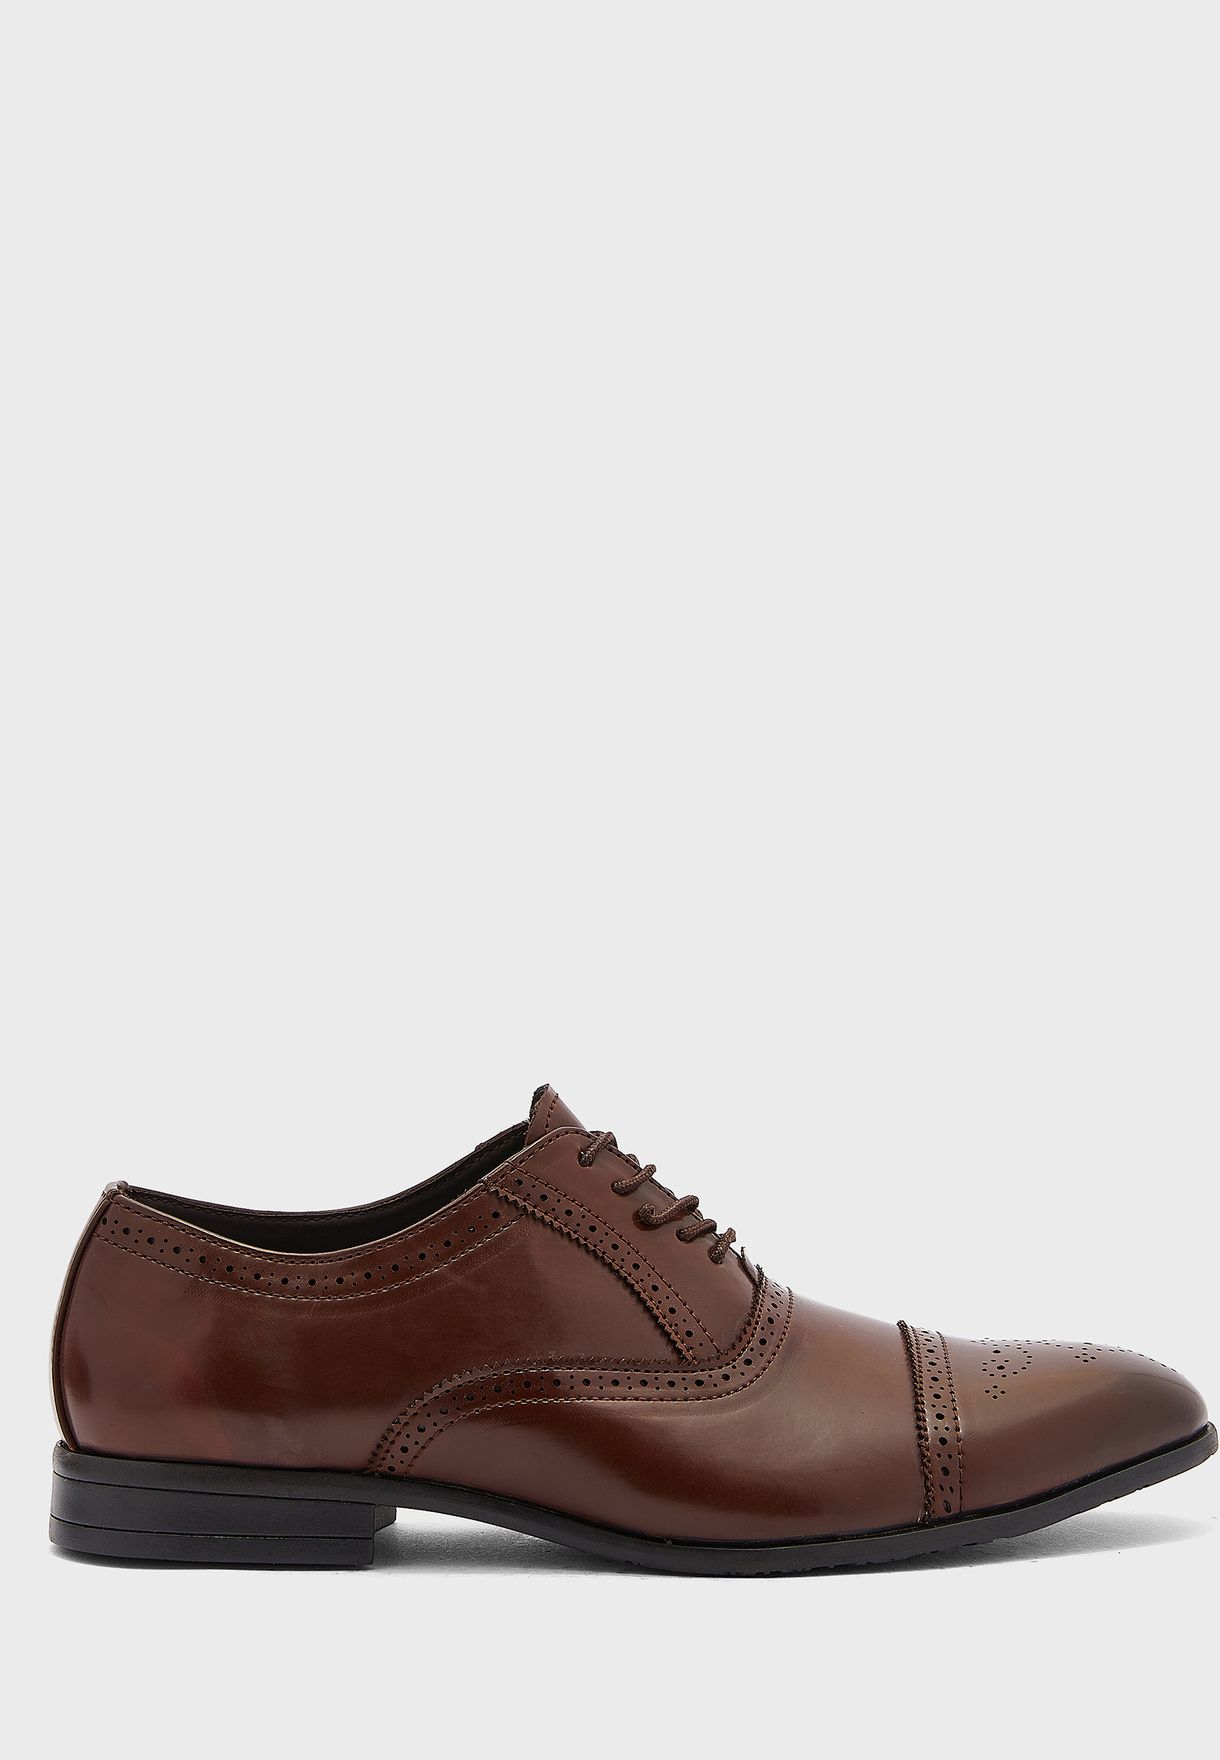 Faux Leather Brogue Oxford Formal Lace Ups